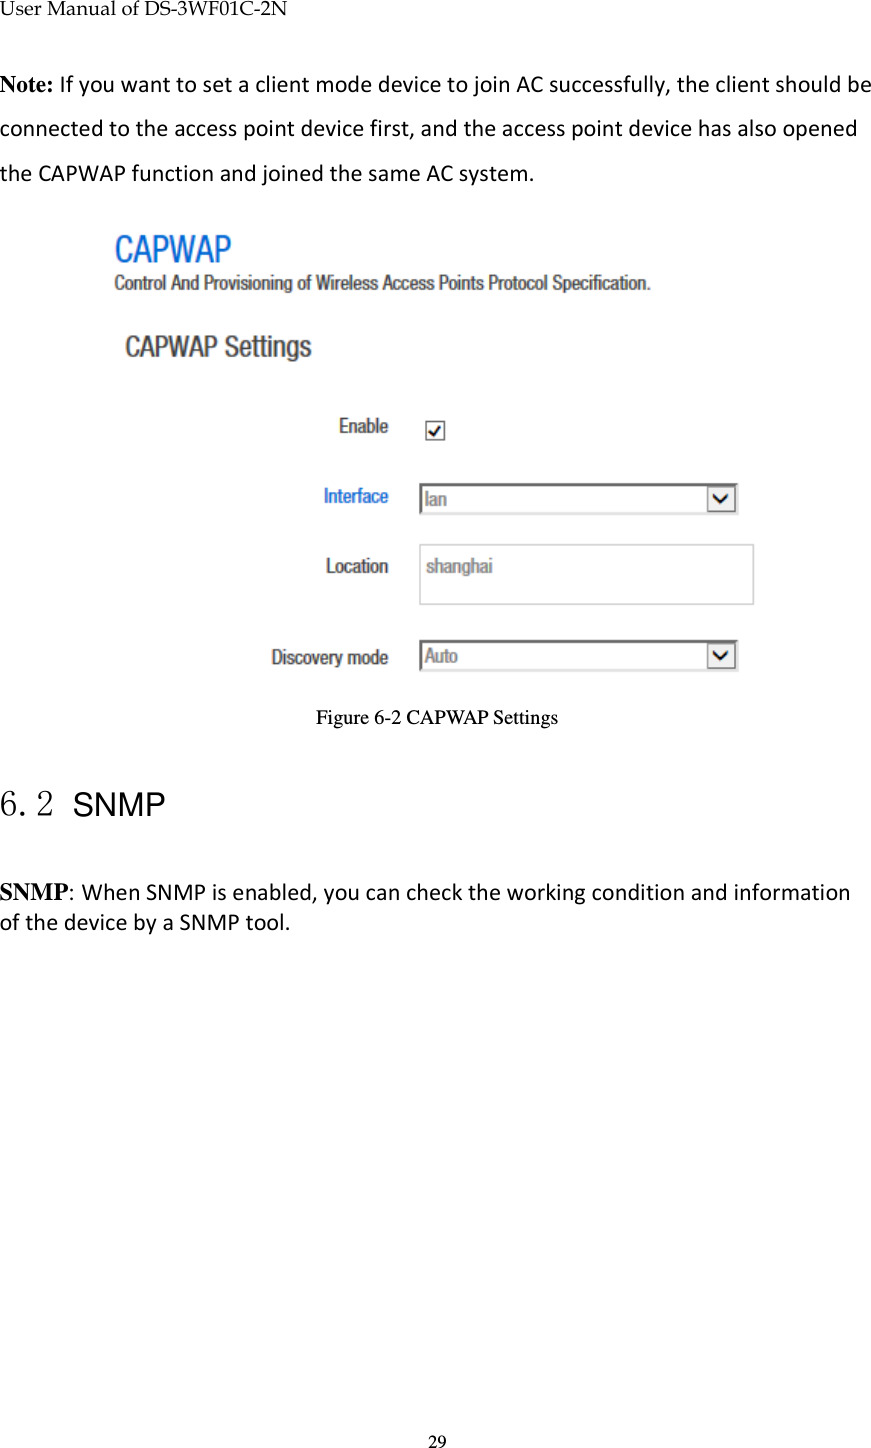 User Manual of DS-3WF01C-2N   29Note: If you want to set a client mode device to join AC successfully, the client should be connected to the access point device first, and the access point device has also opened the CAPWAP function and joined the same AC system.  Figure 6-2 CAPWAP Settings  6.2 SNMP SNMP: When SNMP is enabled, you can check the working condition and information of the device by a SNMP tool.  